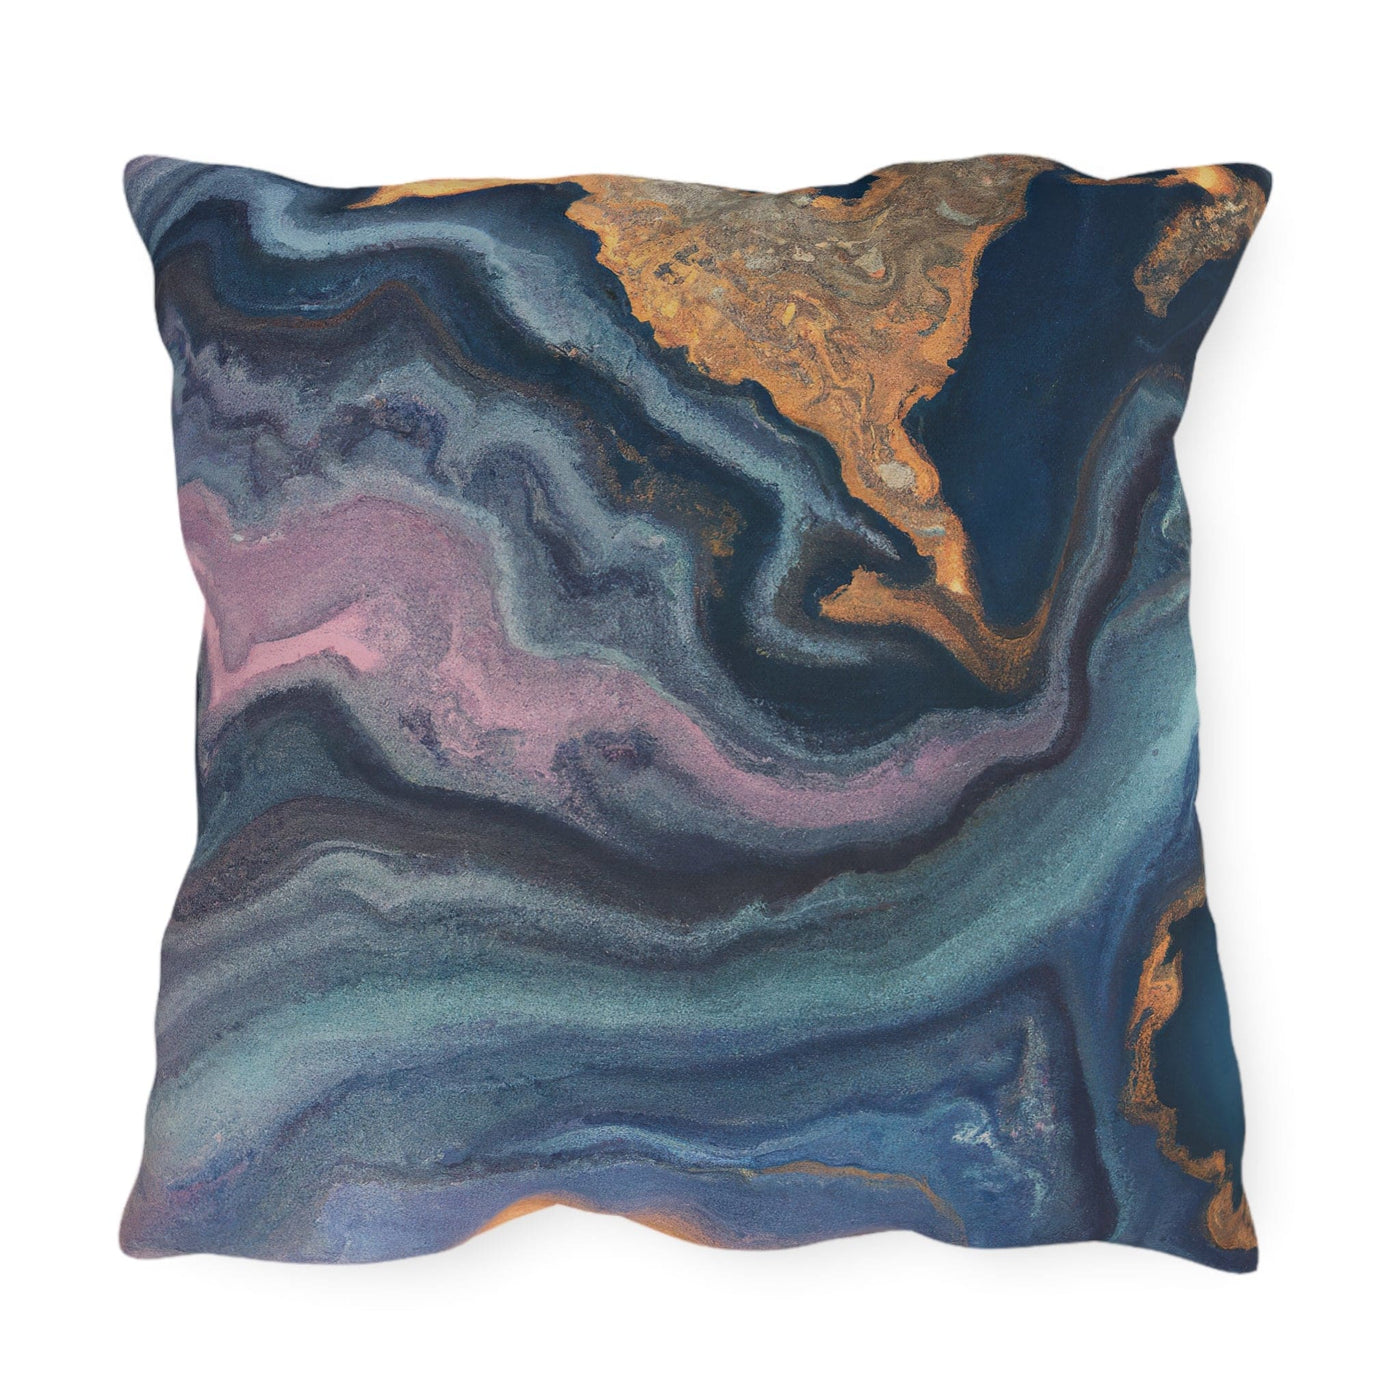 Decorative Outdoor Pillows With Zipper - Set Of 2 Blue Pink Gold Abstract